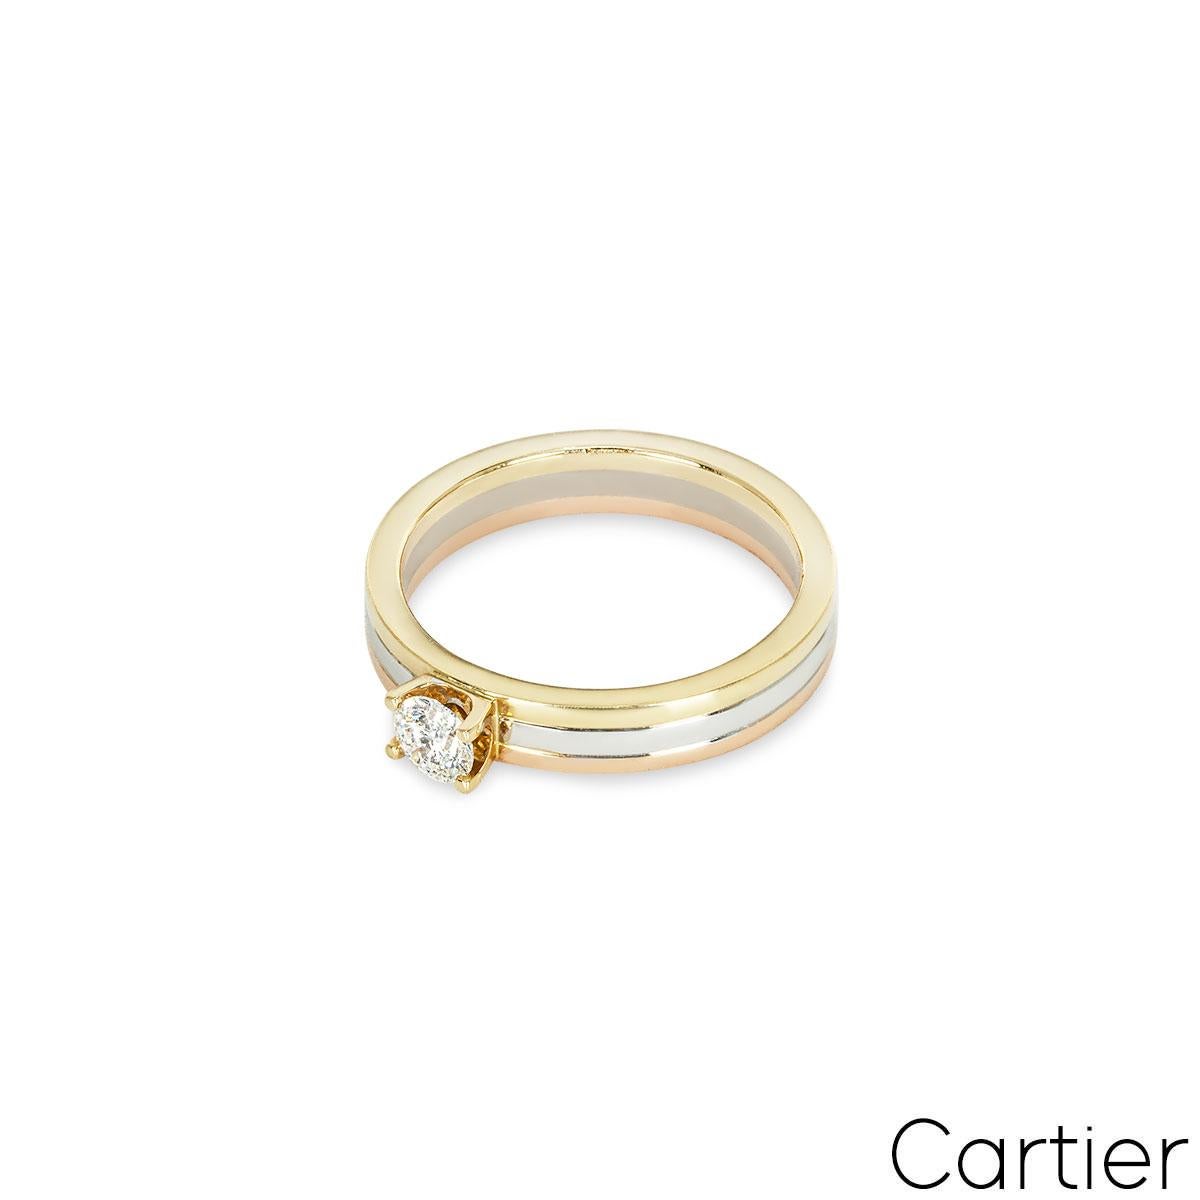 Cartier Tri-Colour Trinity Round Brilliant Cut Diamond Ring 0.24ct Size 52 N4204 In Excellent Condition For Sale In London, GB